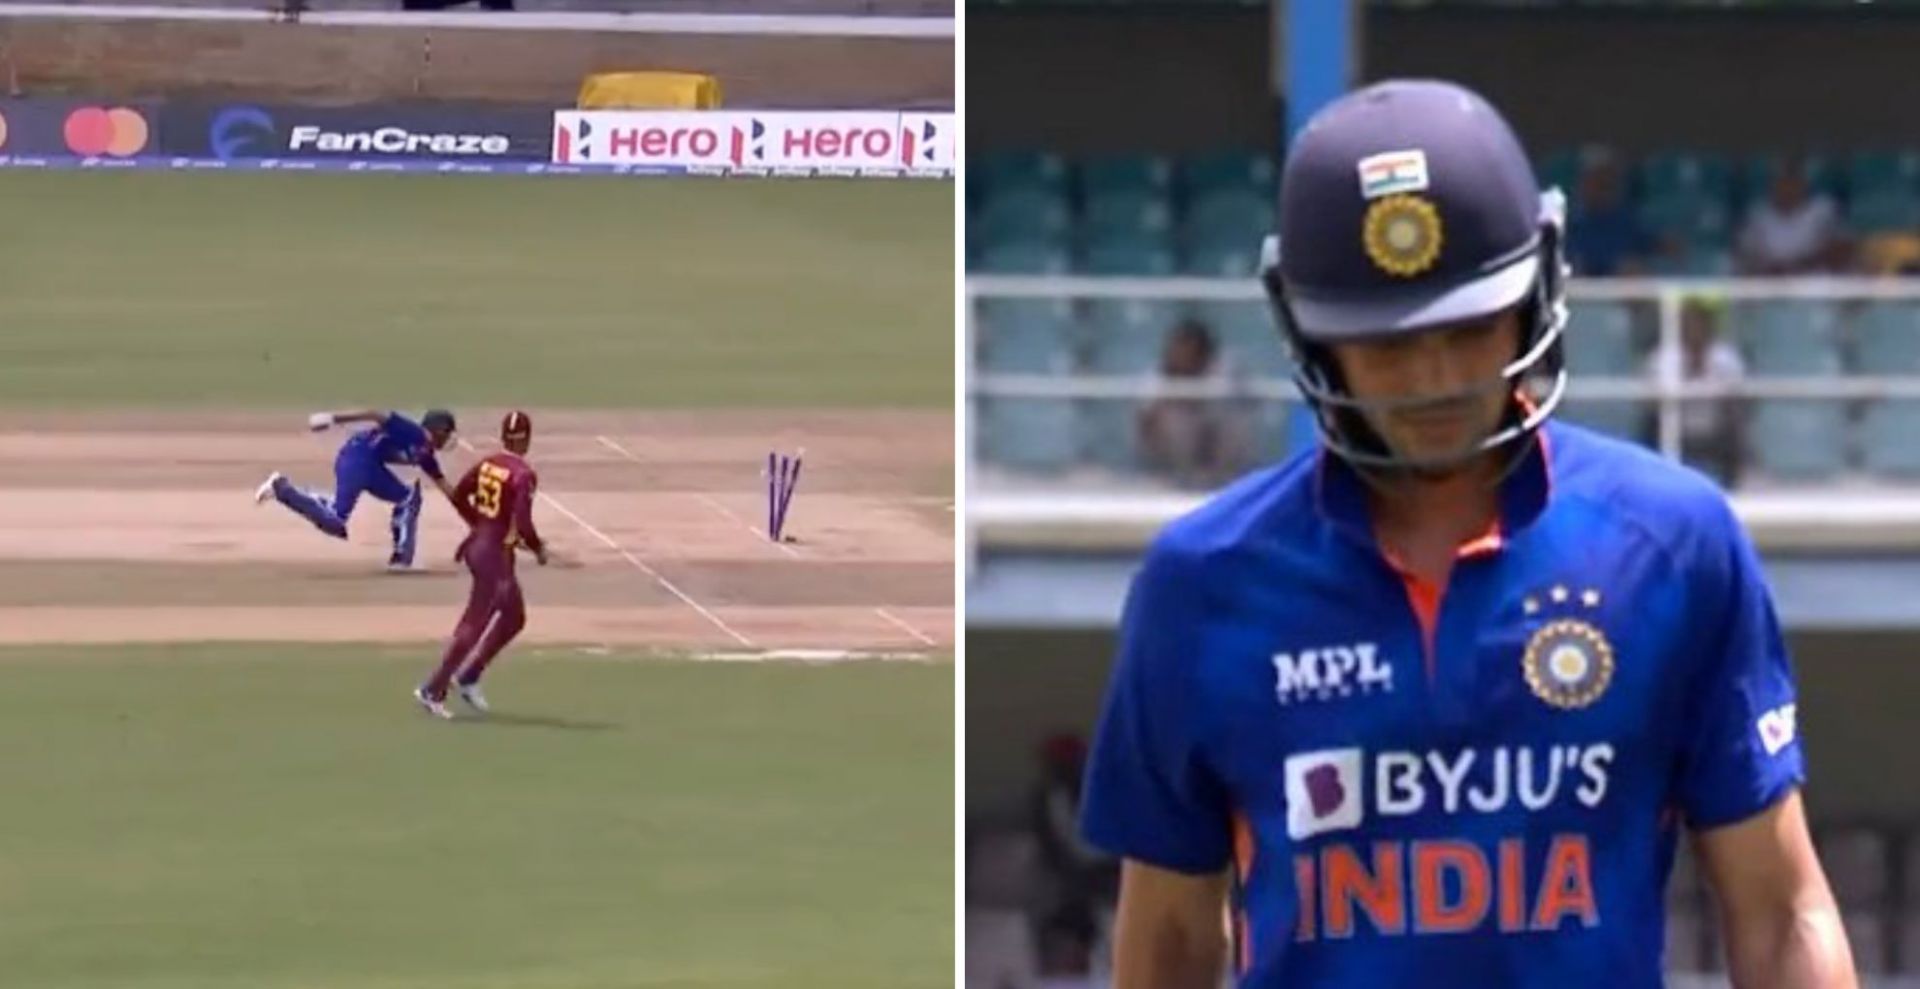 Shubman Gill failed to convert his fifty into a hundred. (Credit: Twitter)